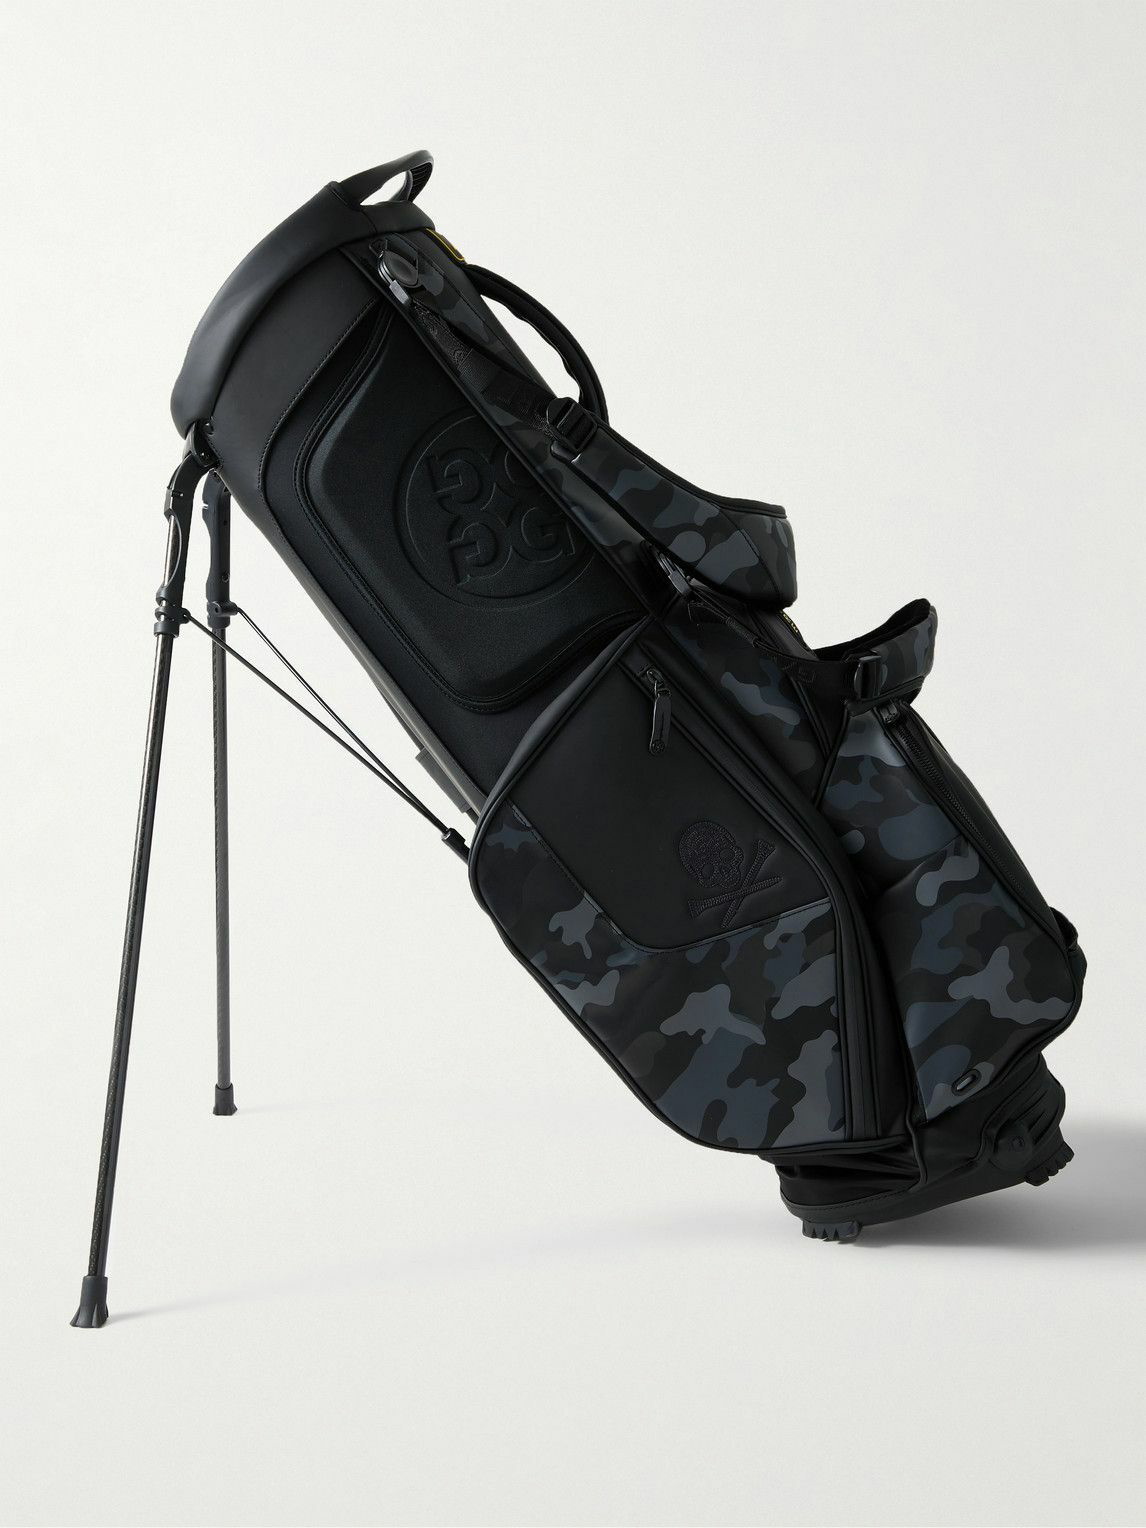 Player III Carbon Black, Limited Edition Golf Bag